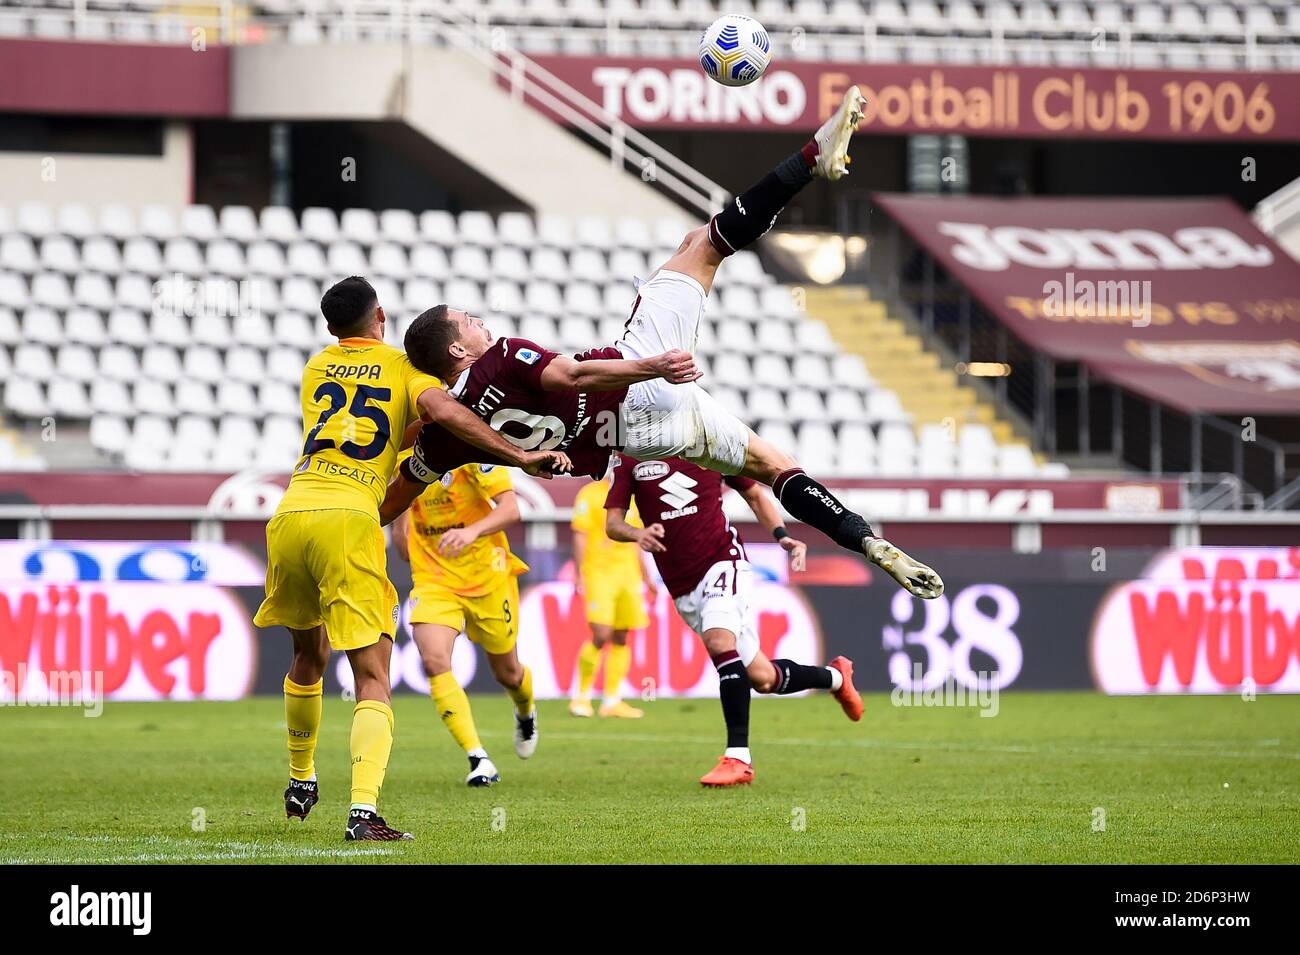 Turin, Italy - 18 October, 2020: Andrea Belotti (R) of Torino FC attempts a bicycle kick during the Serie A football match between Torino FC and Cagliari Calcio. Cagliari Calcio won 3-2 over Torino FC. Credit: Nicolò Campo/Alamy Live News Stock Photo